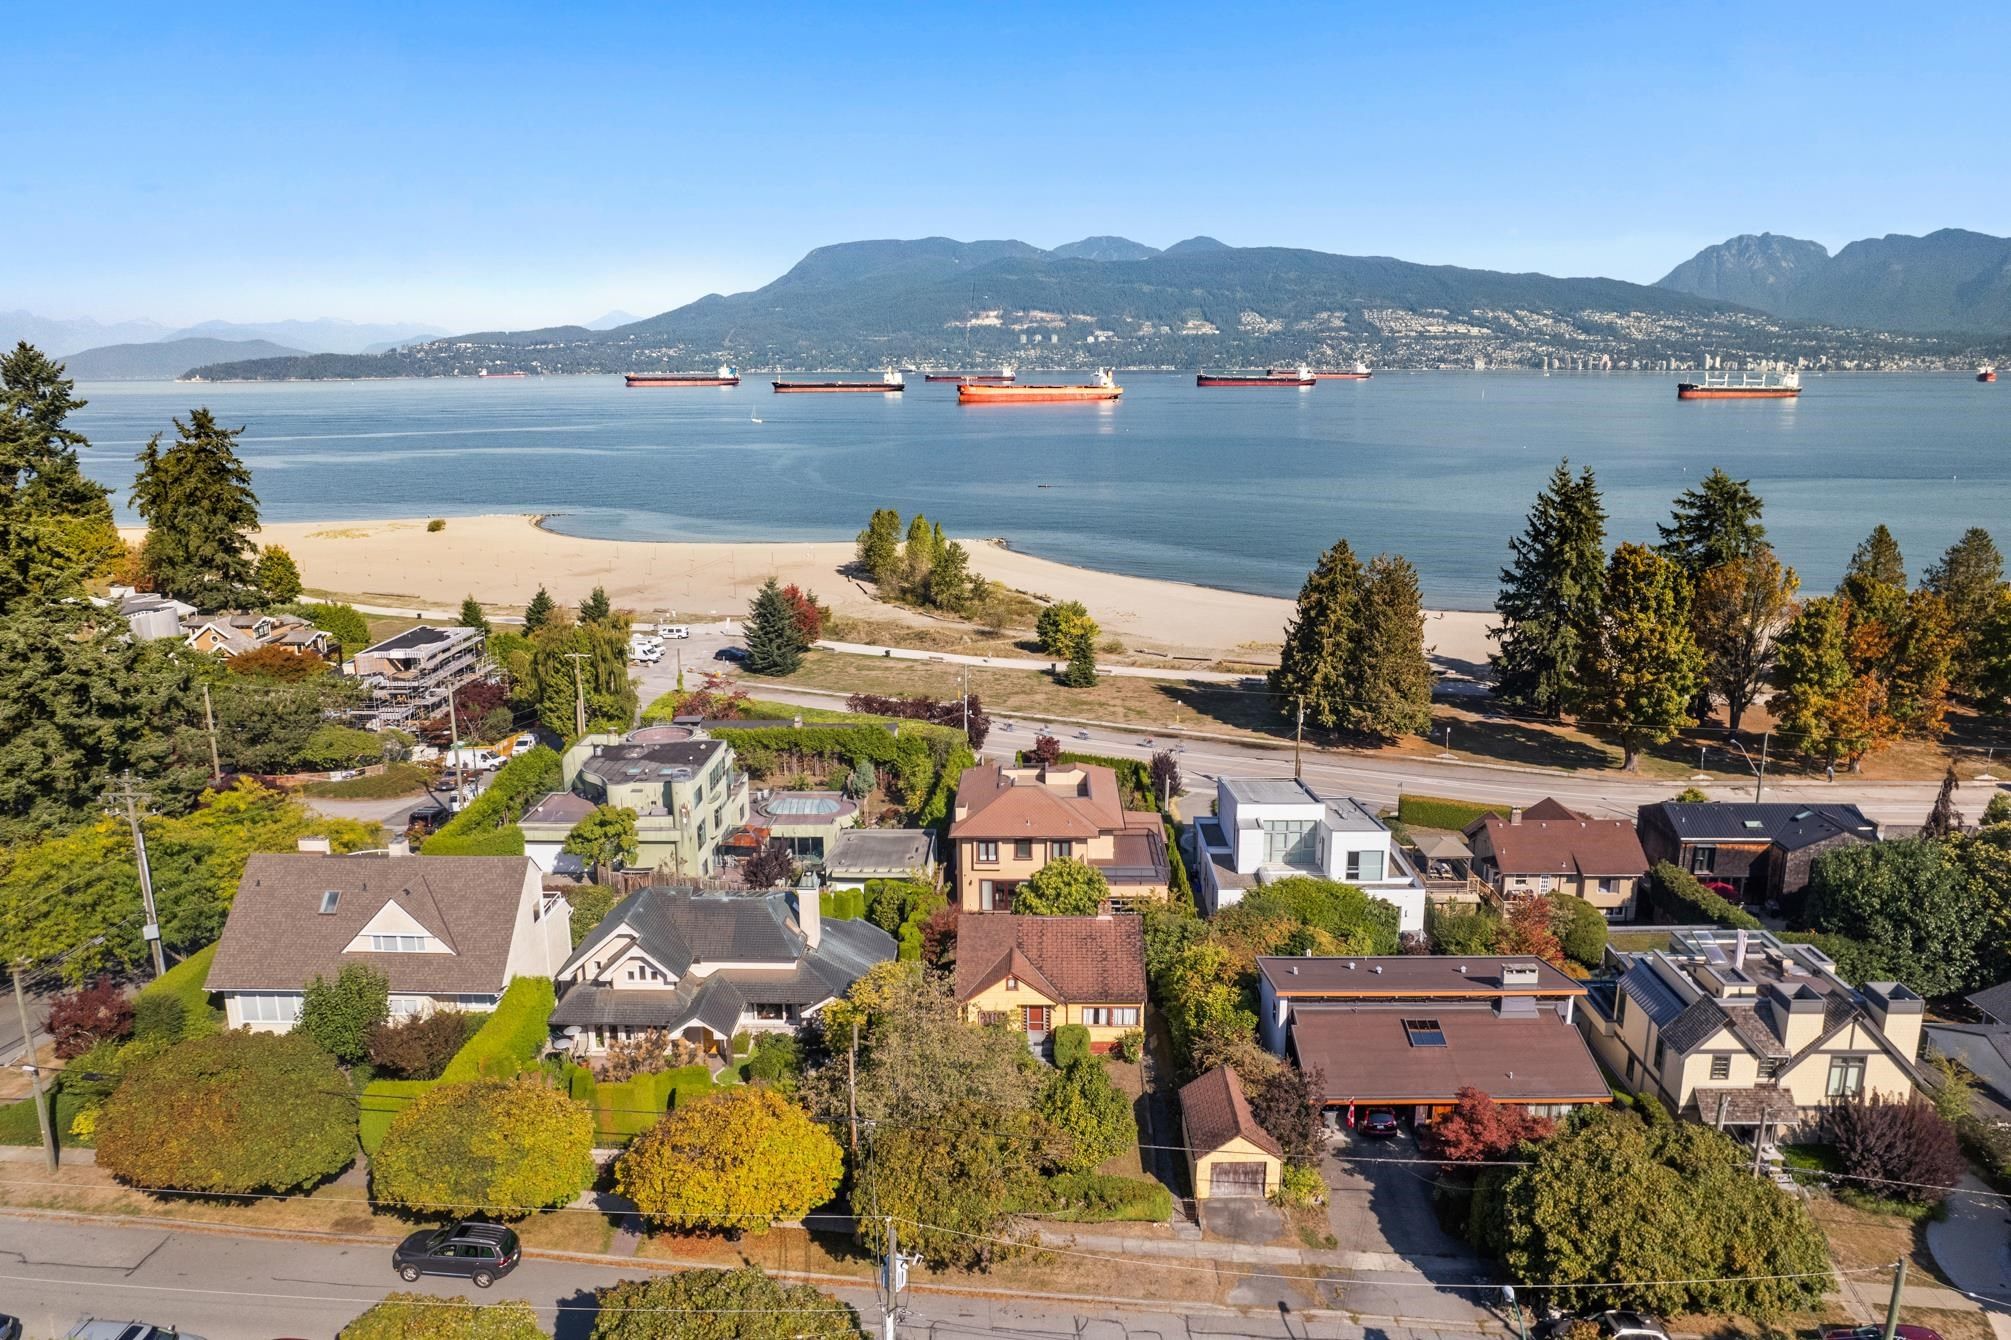 We have sold a property at 4577 BELMONT AVE in VANCOUVER